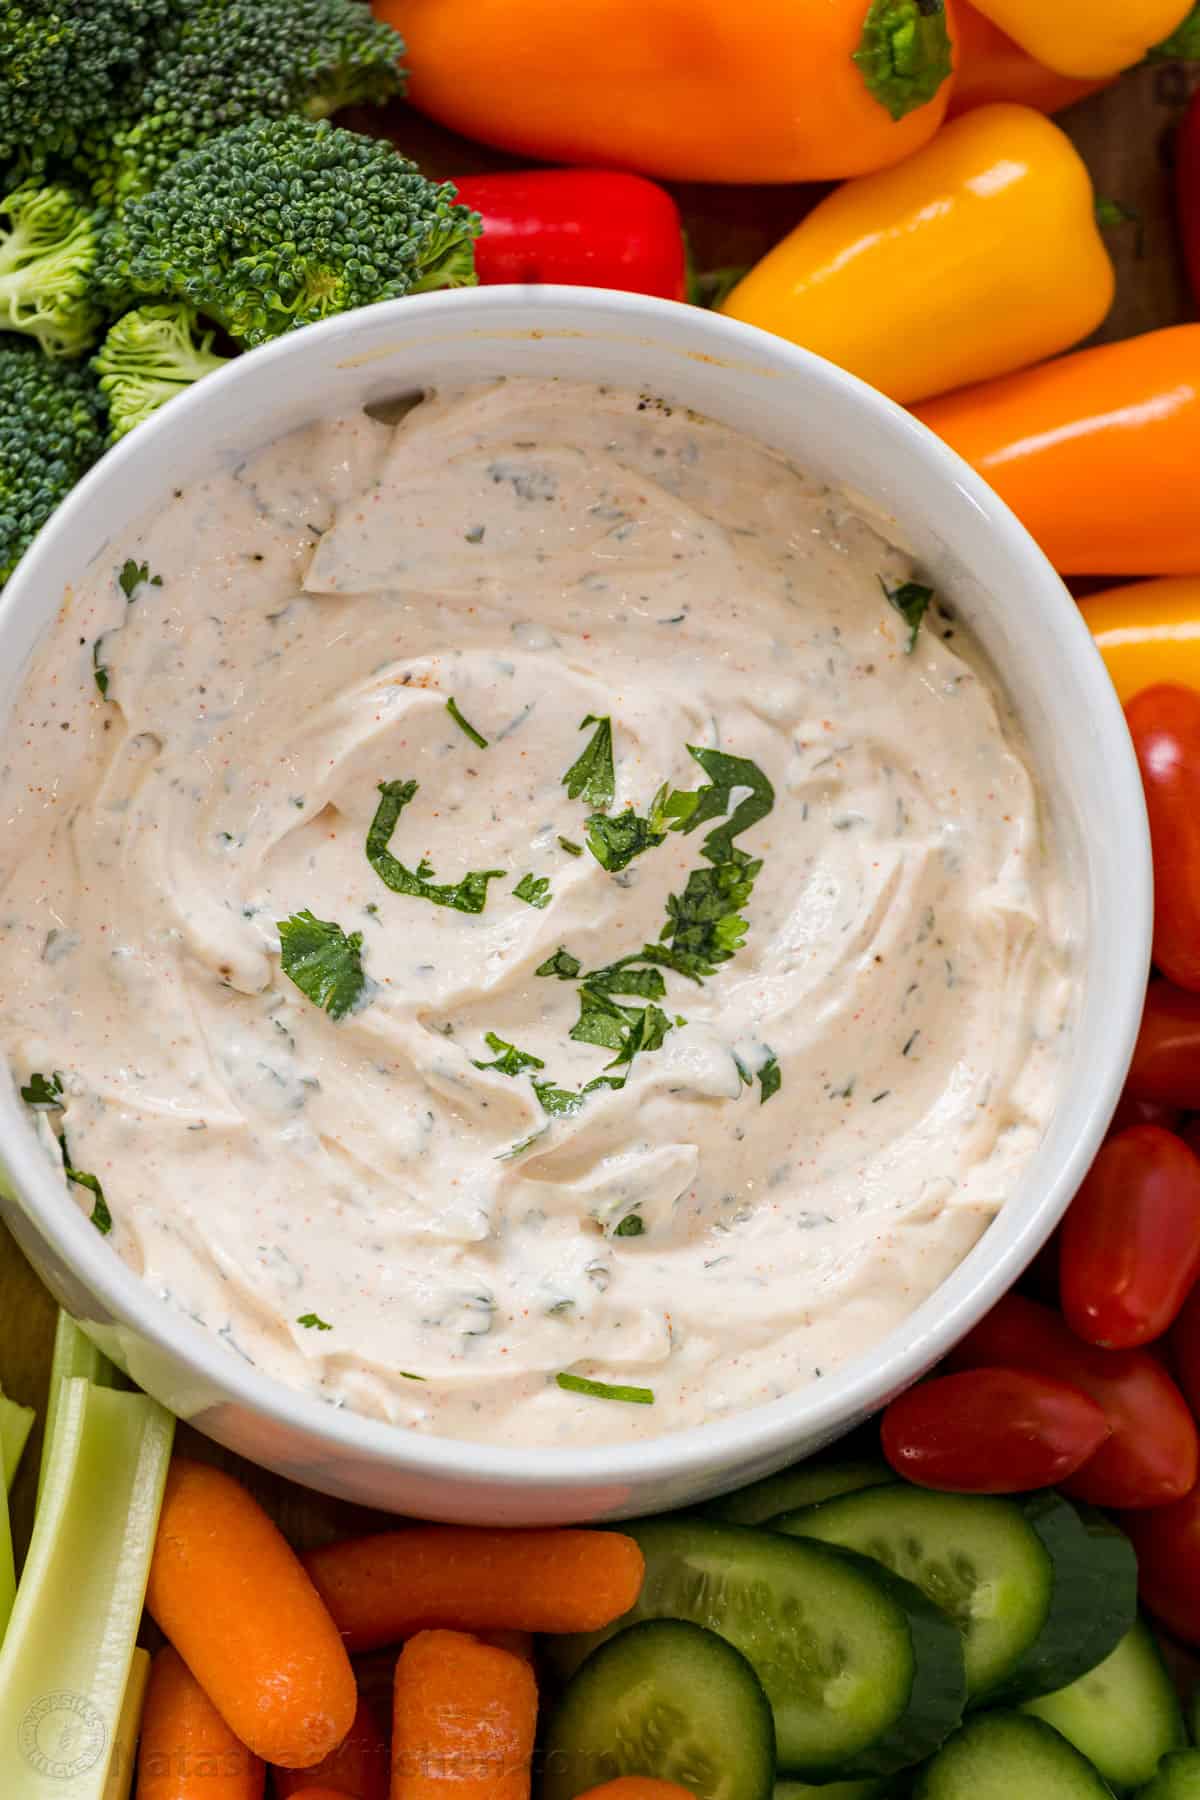 Veggie dip on a platter garnished with cilantro with fresh vegetables arranged.